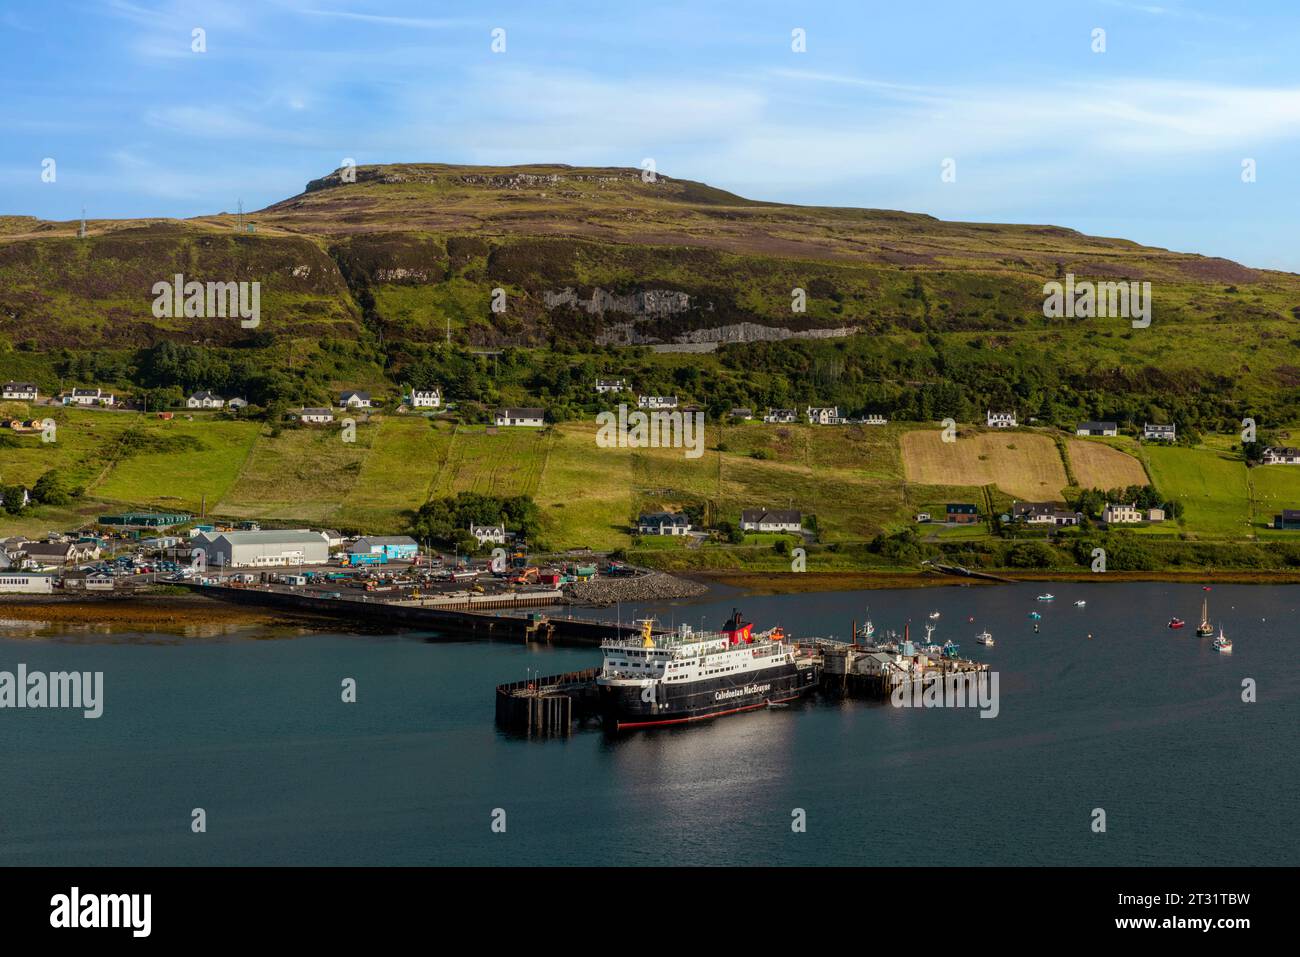 Uig Pier is the main ferry port on the Isle of Skye, with ferries to Tarbert on Harris and Lochmaddy on North Uist. Stock Photo